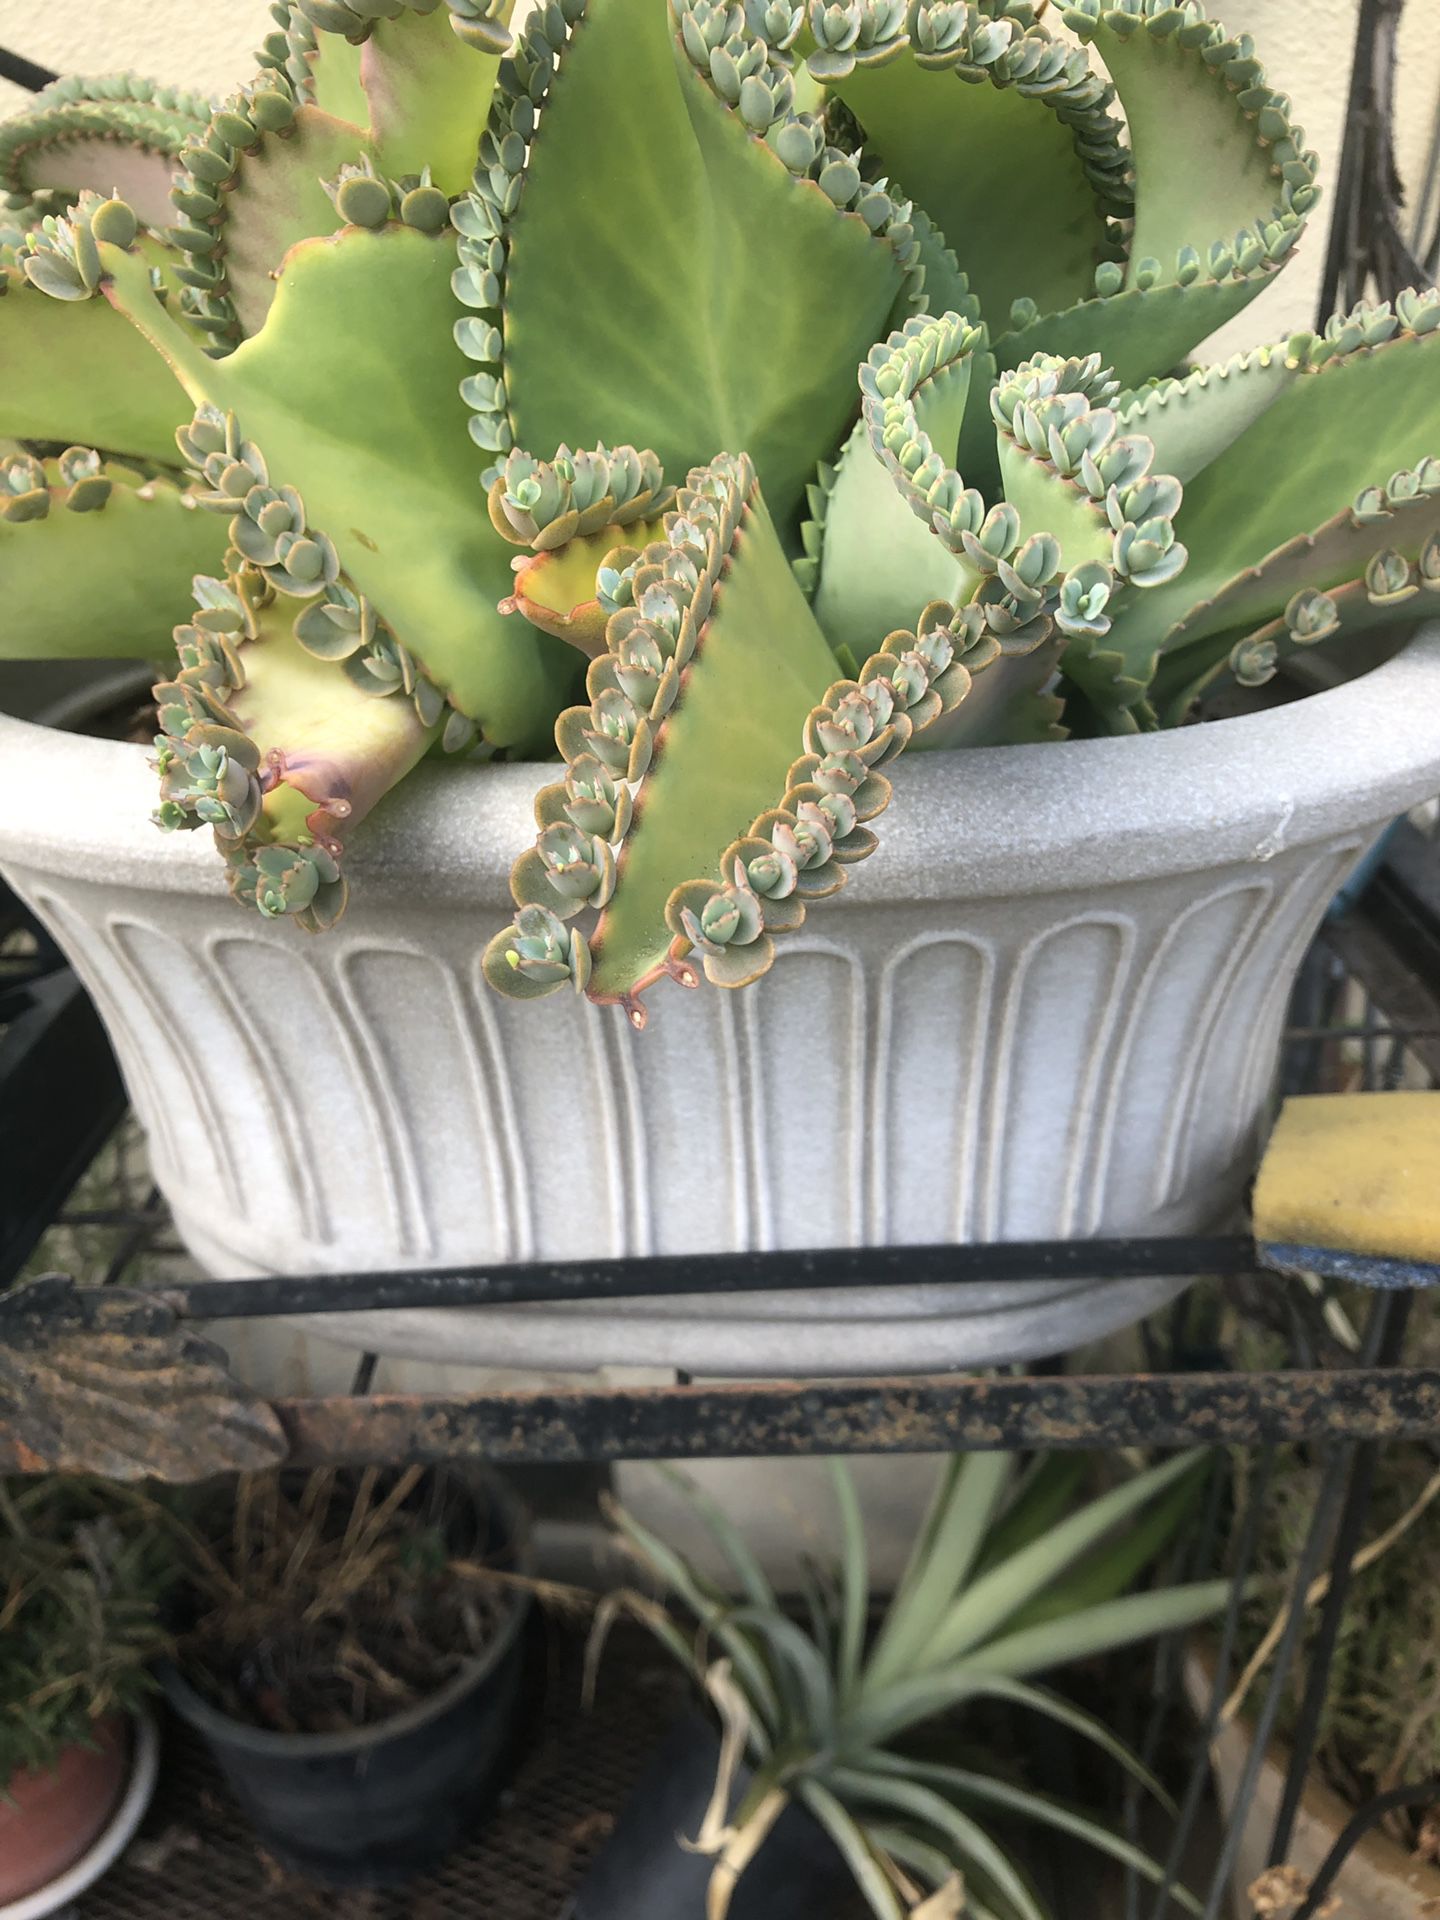 Mother of thousands potted plant